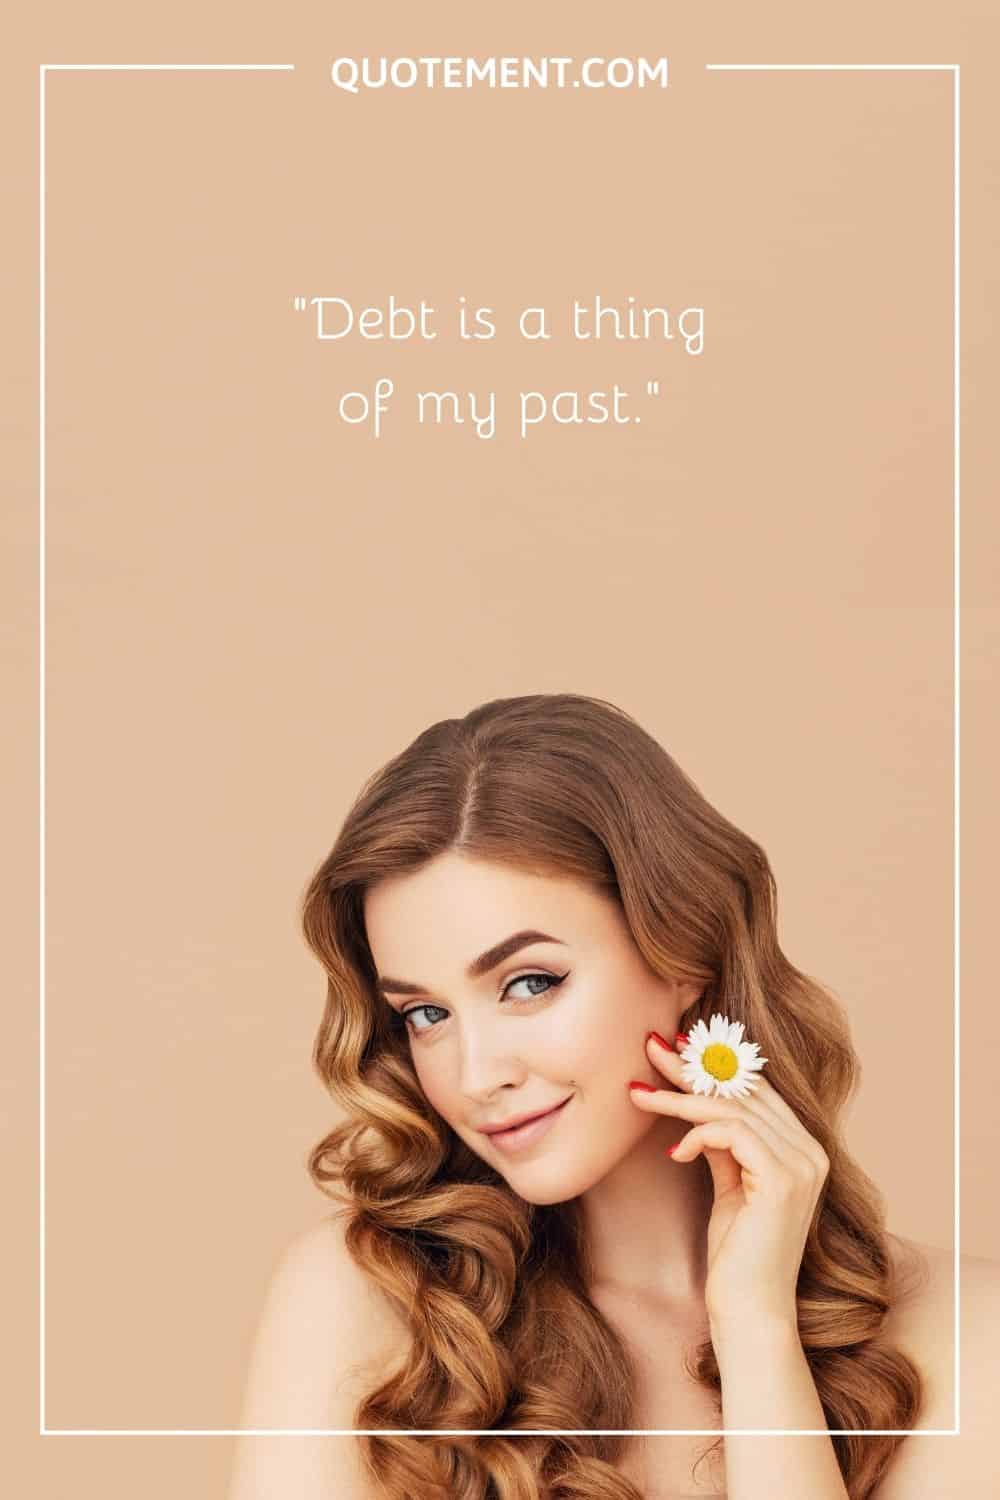 Debt is a thing of my past.